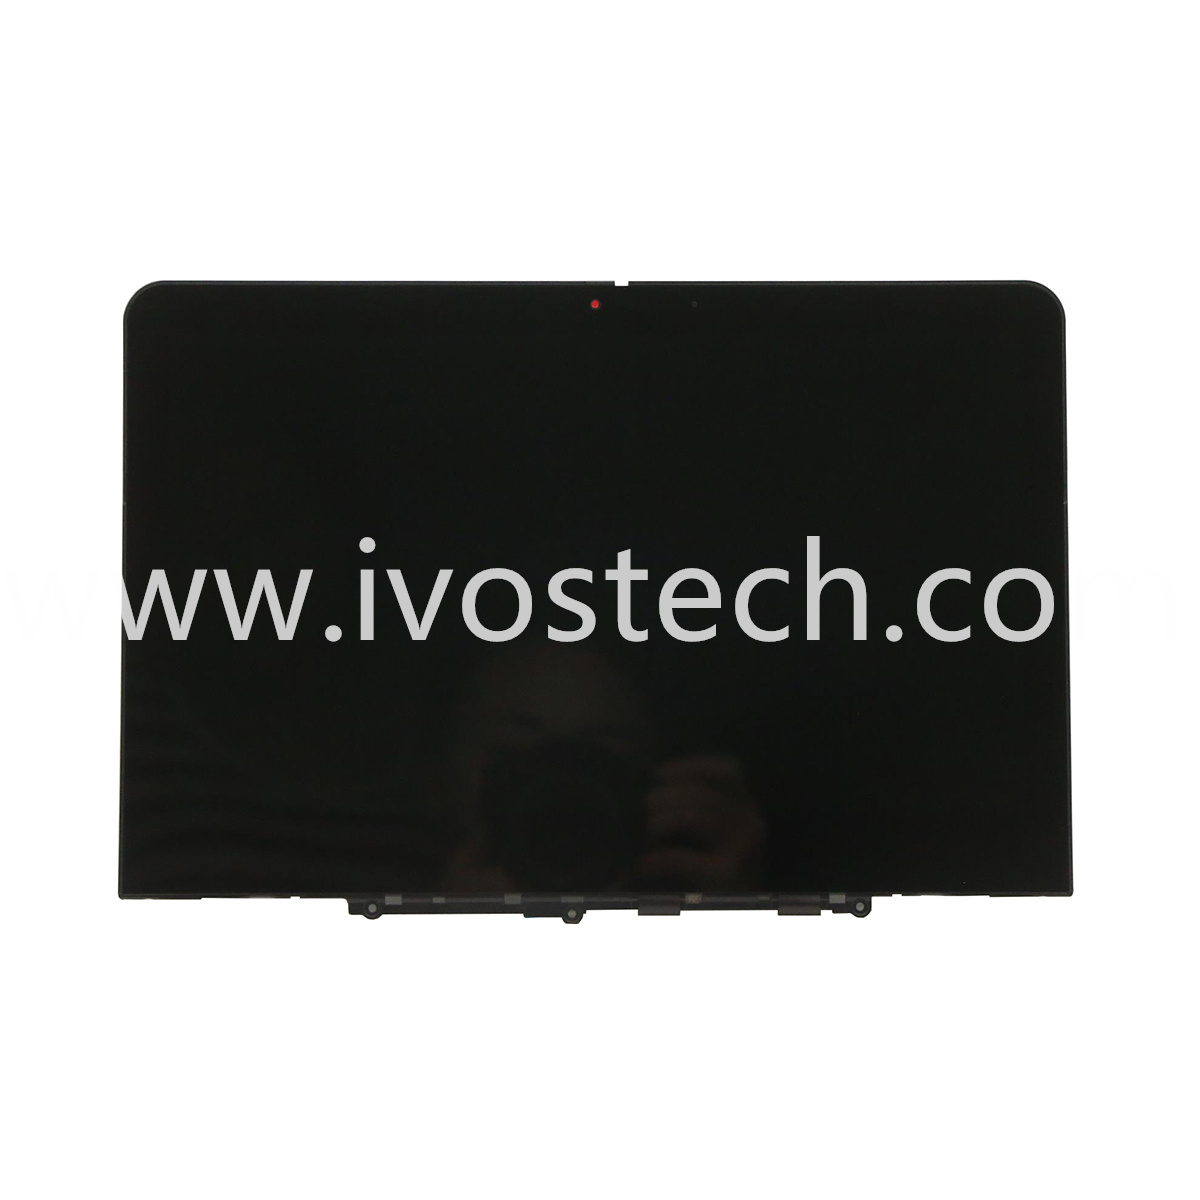 5M11C85599 11.6” HD Laptop LCD Touch Screen Display with Bezel Assembly for Lenovo 300w 500w Gen 3